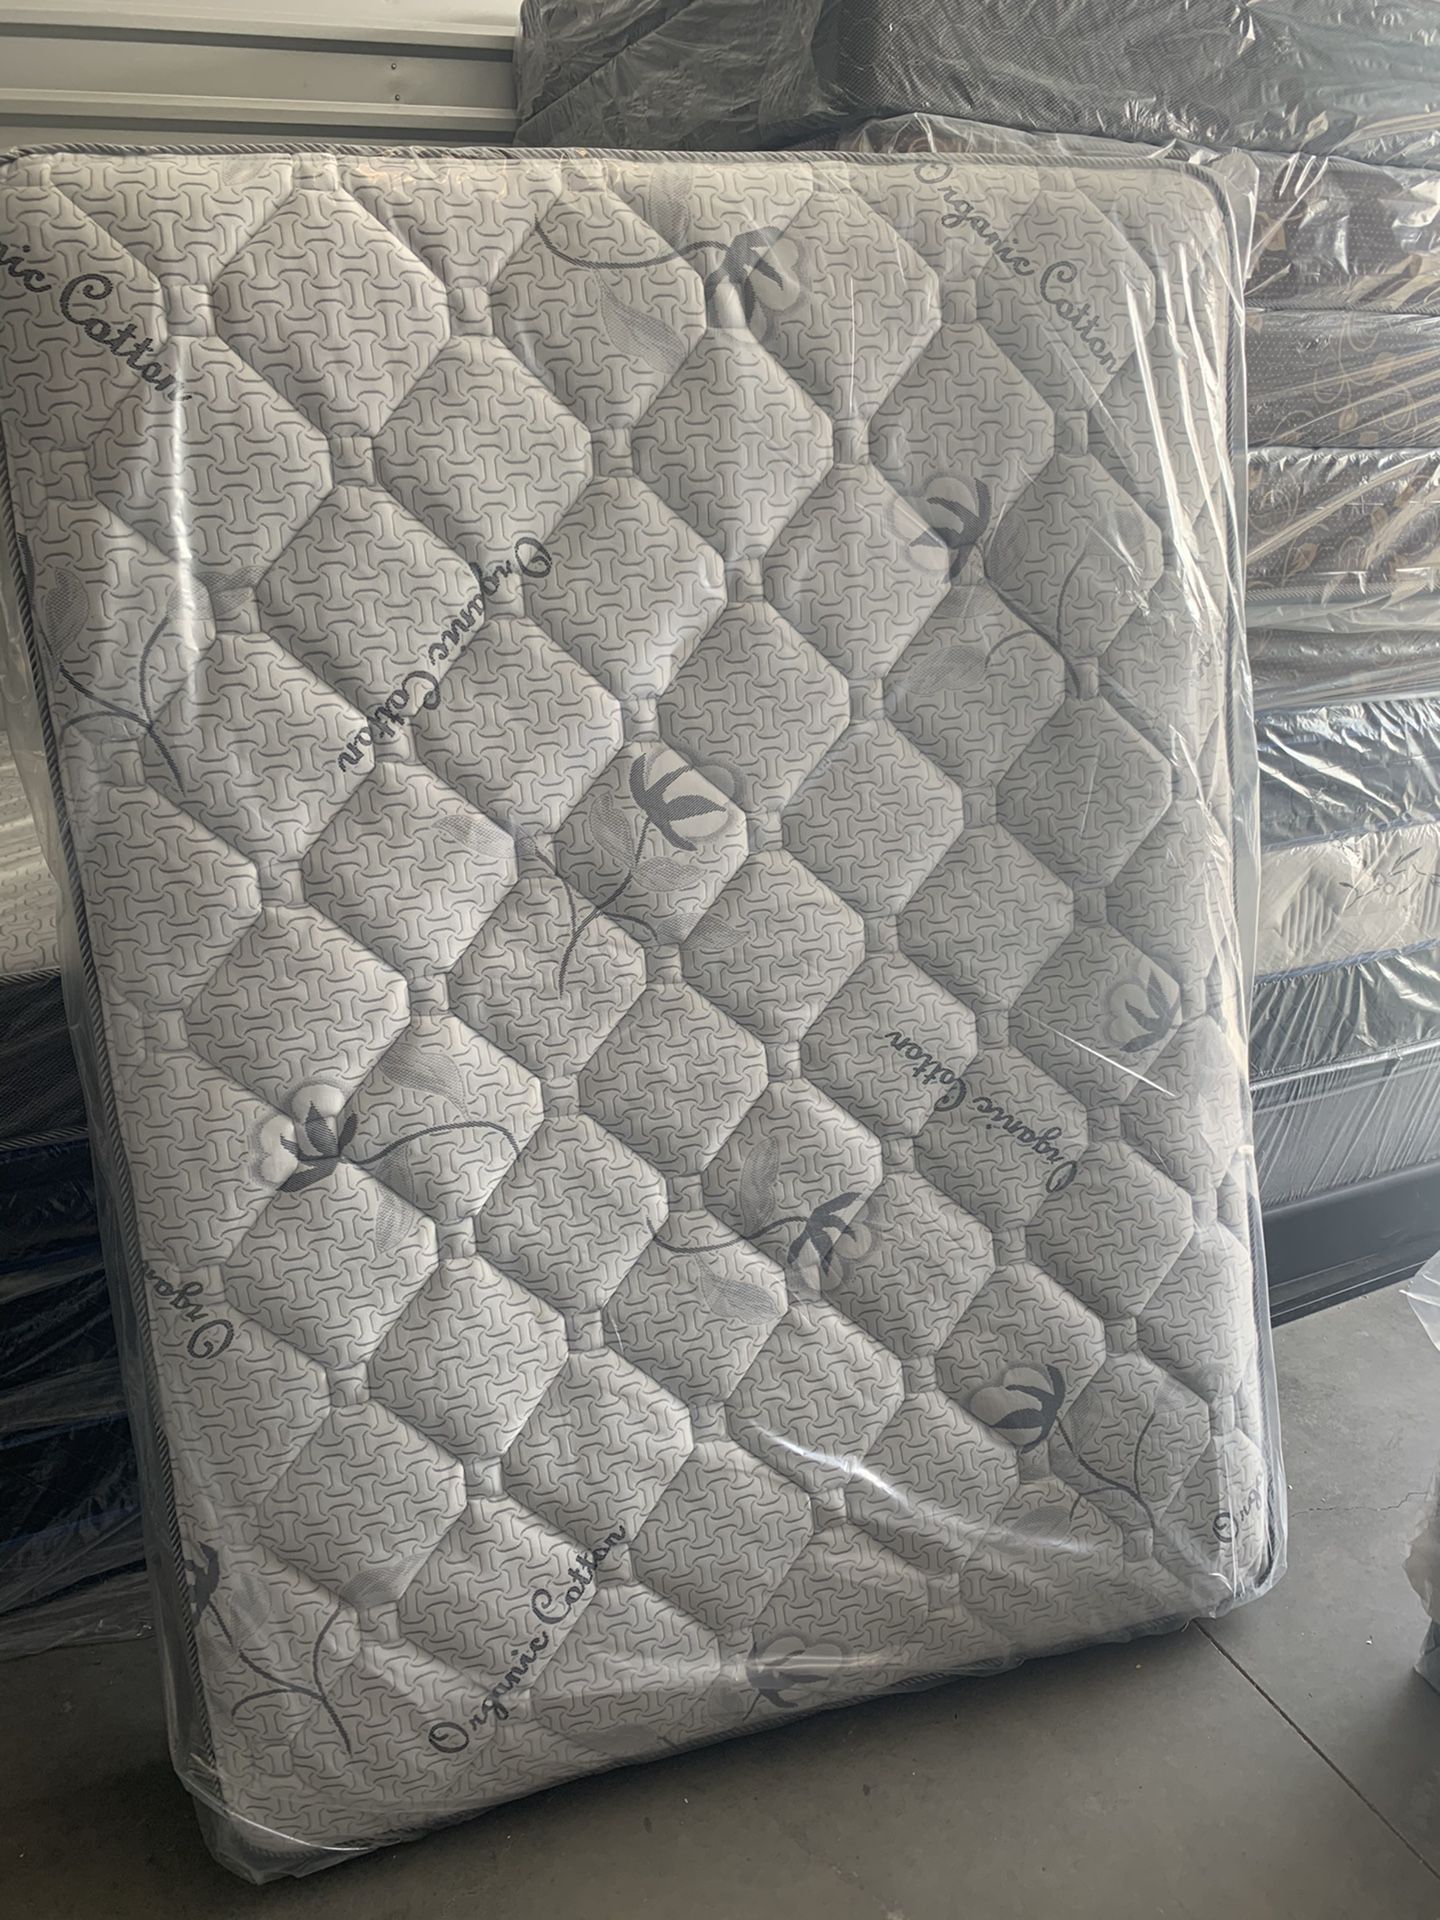 Brand new Queen size mattress with boxspring included